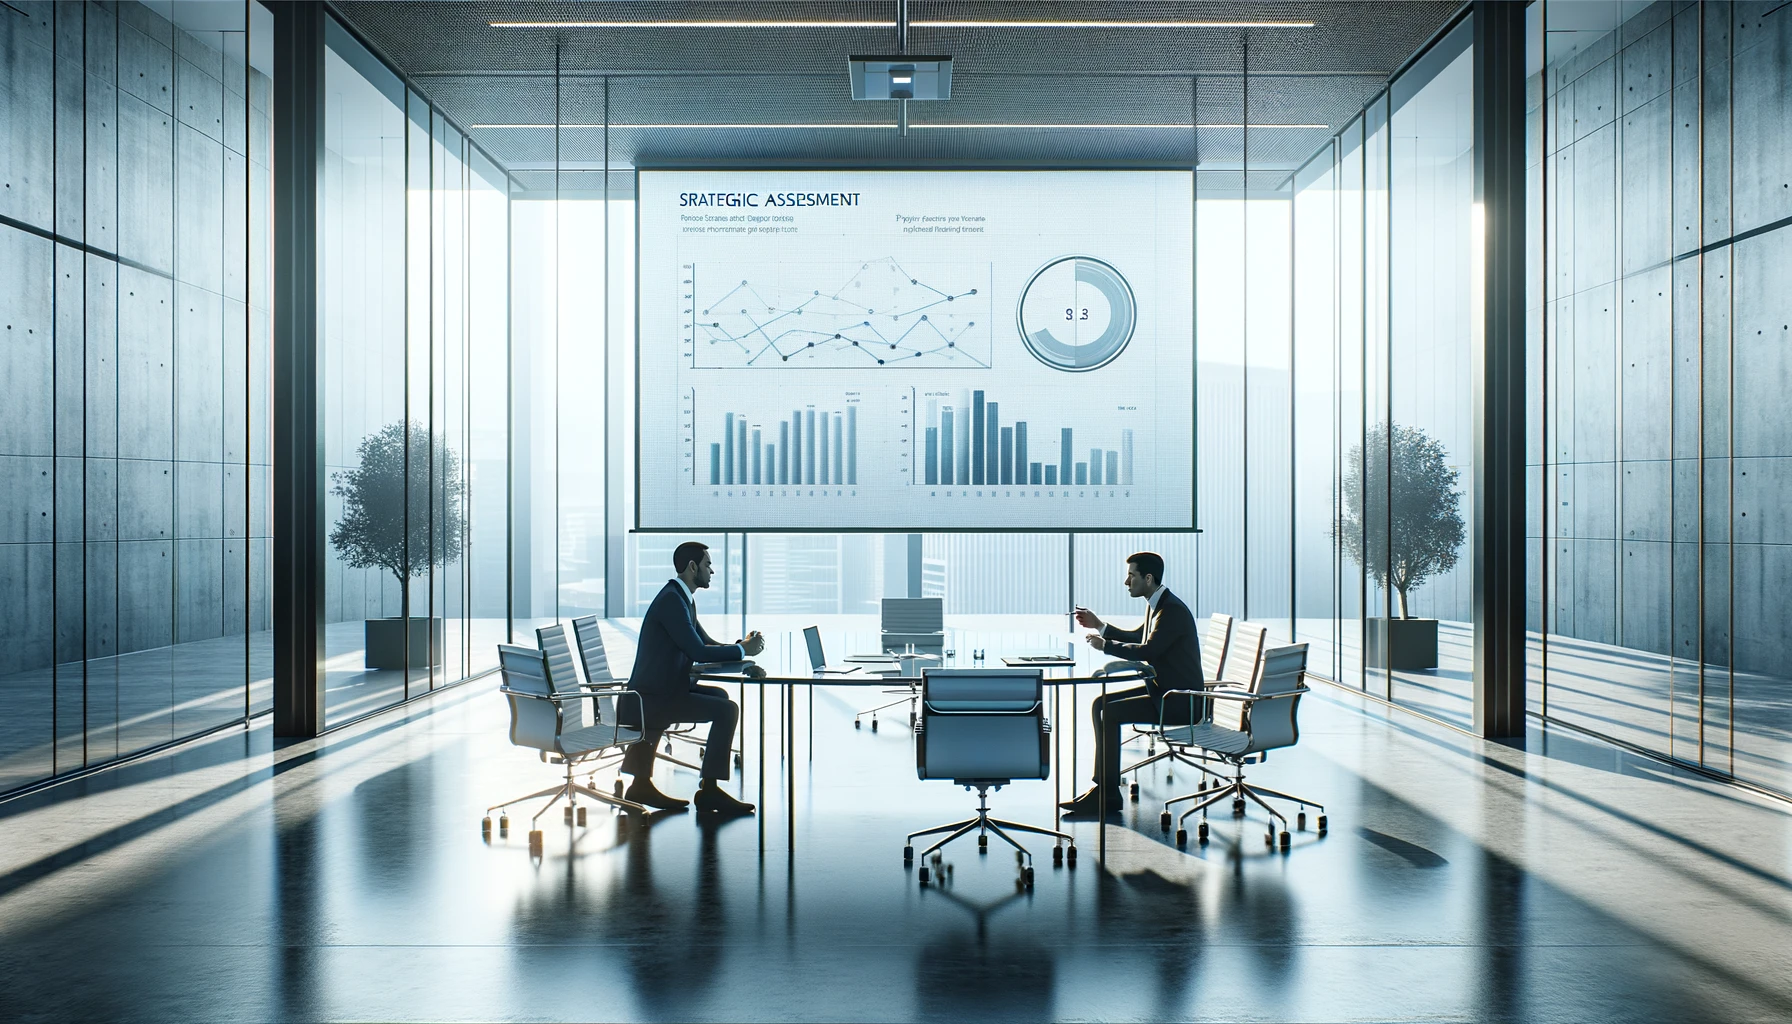 A minimalist corporate setting with a sleek, glass conference table where two professionals are engaged in a focused strategic discussion, with a large screen displaying a clear graph of key performance indicators in the background, highlighting clarity and insight in strategic planning.